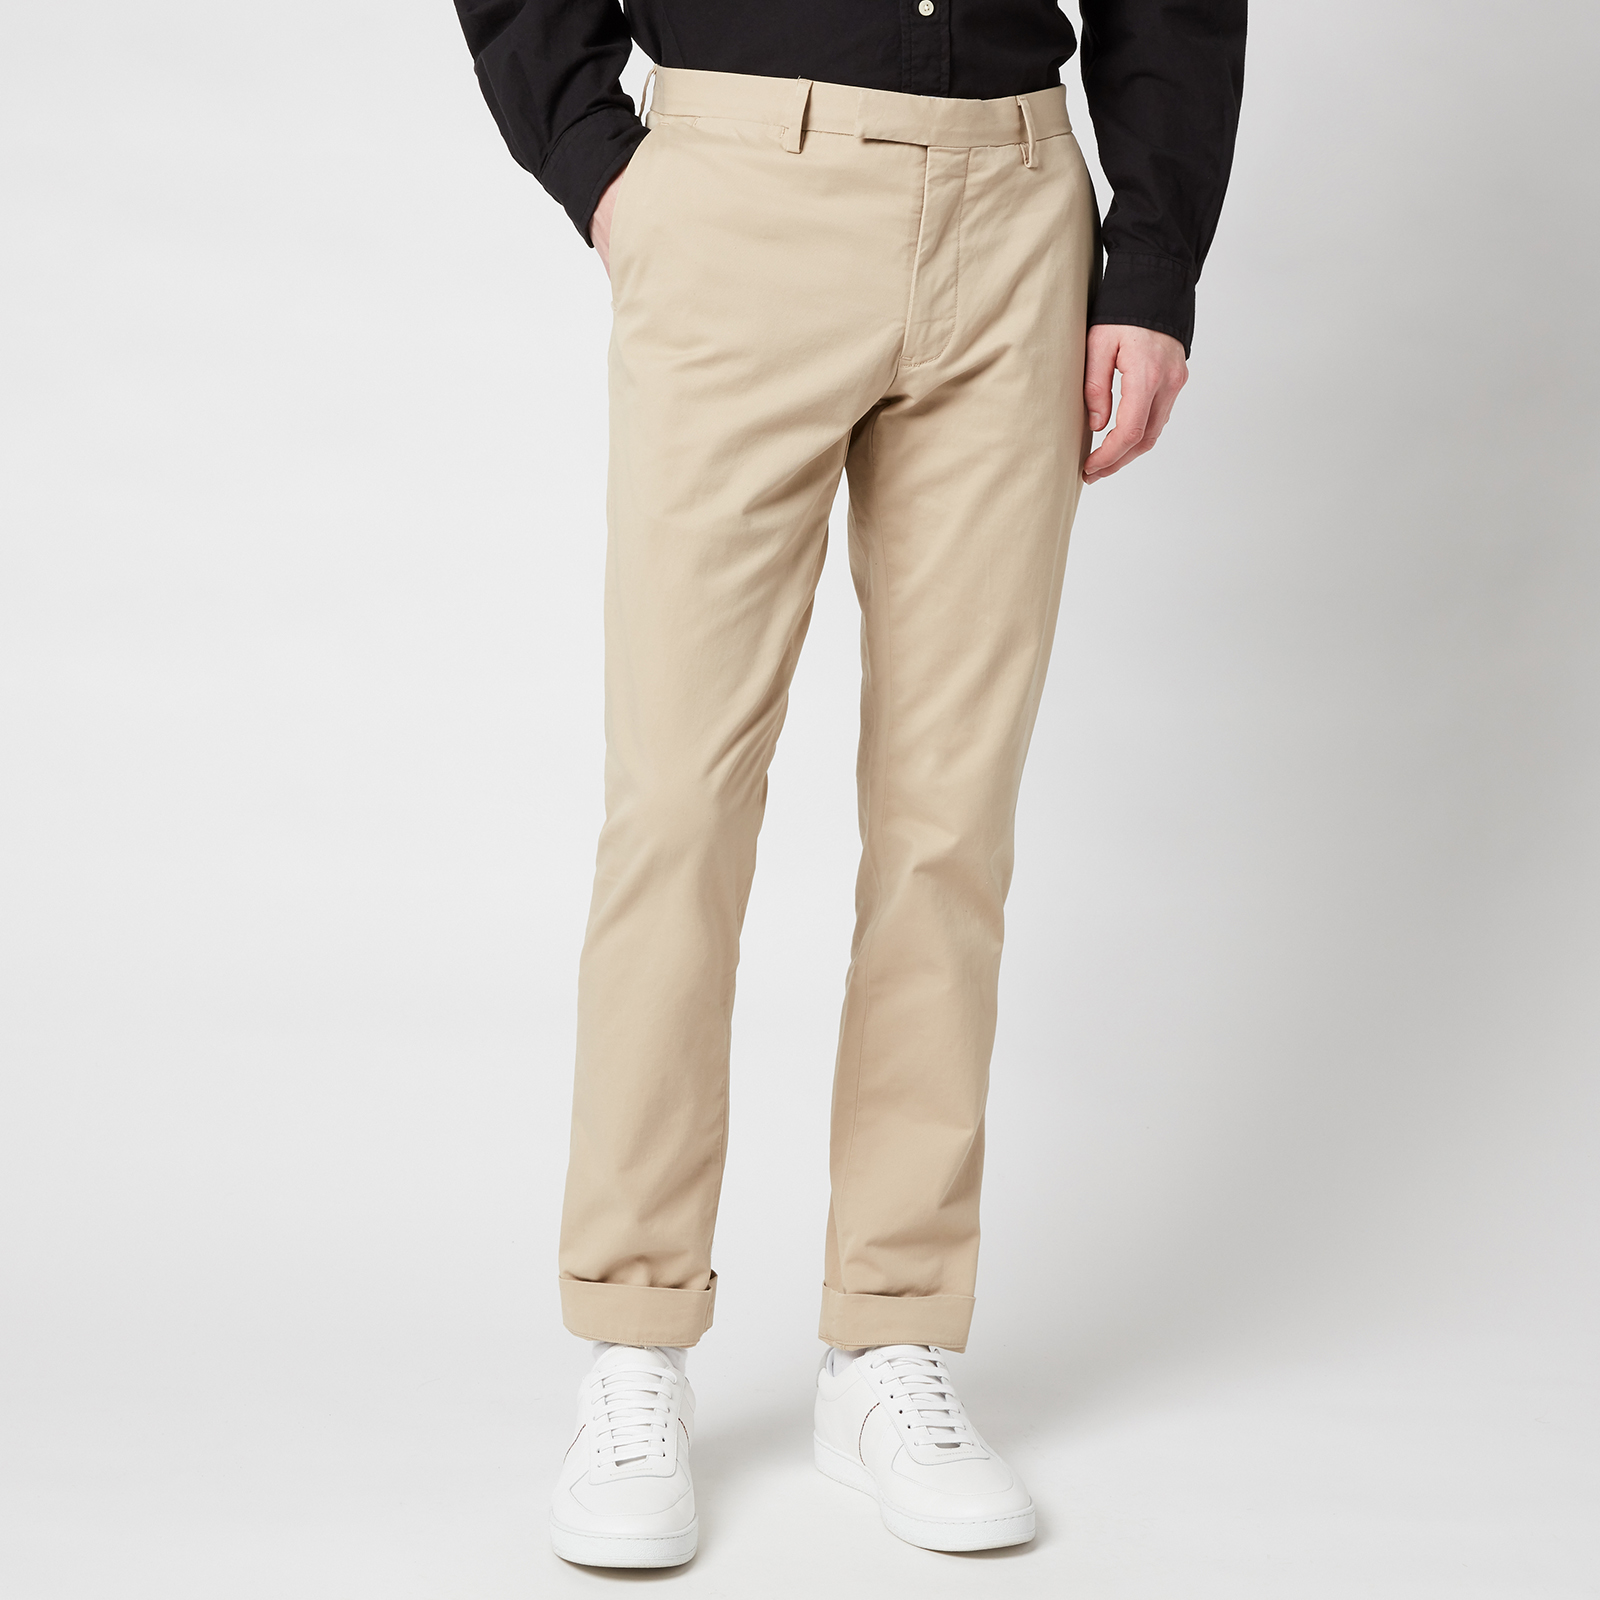 G.H. Bass & Co. Stretch Khakis & Chinos for Men